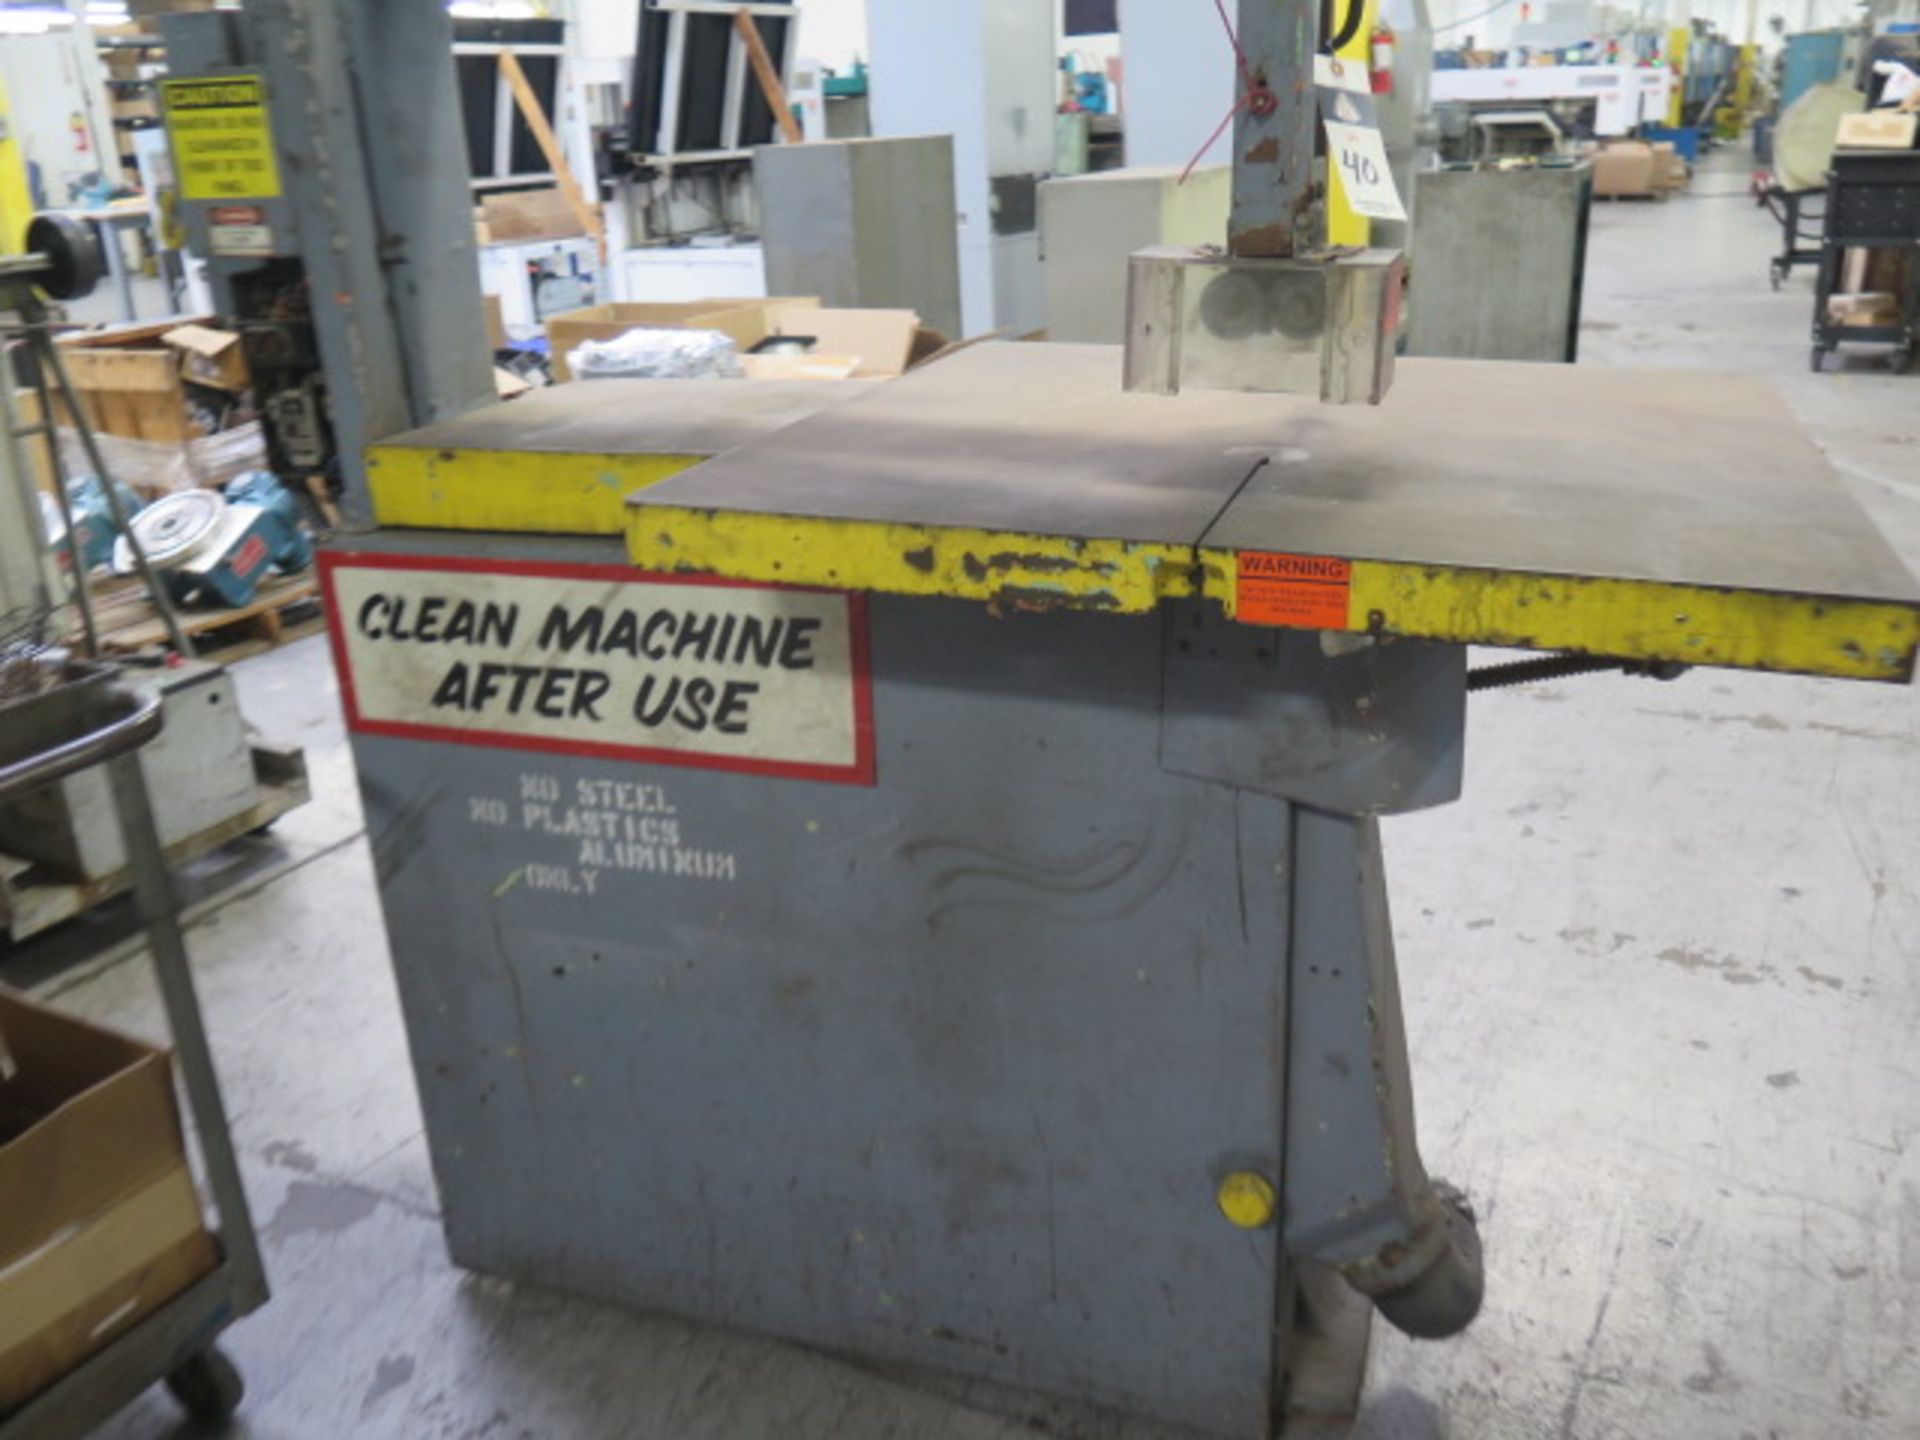 Frank Jones mdl. B-36 36" Vertical Band Saw s/n 3602 w/ 36" x 36" Table - Image 4 of 6